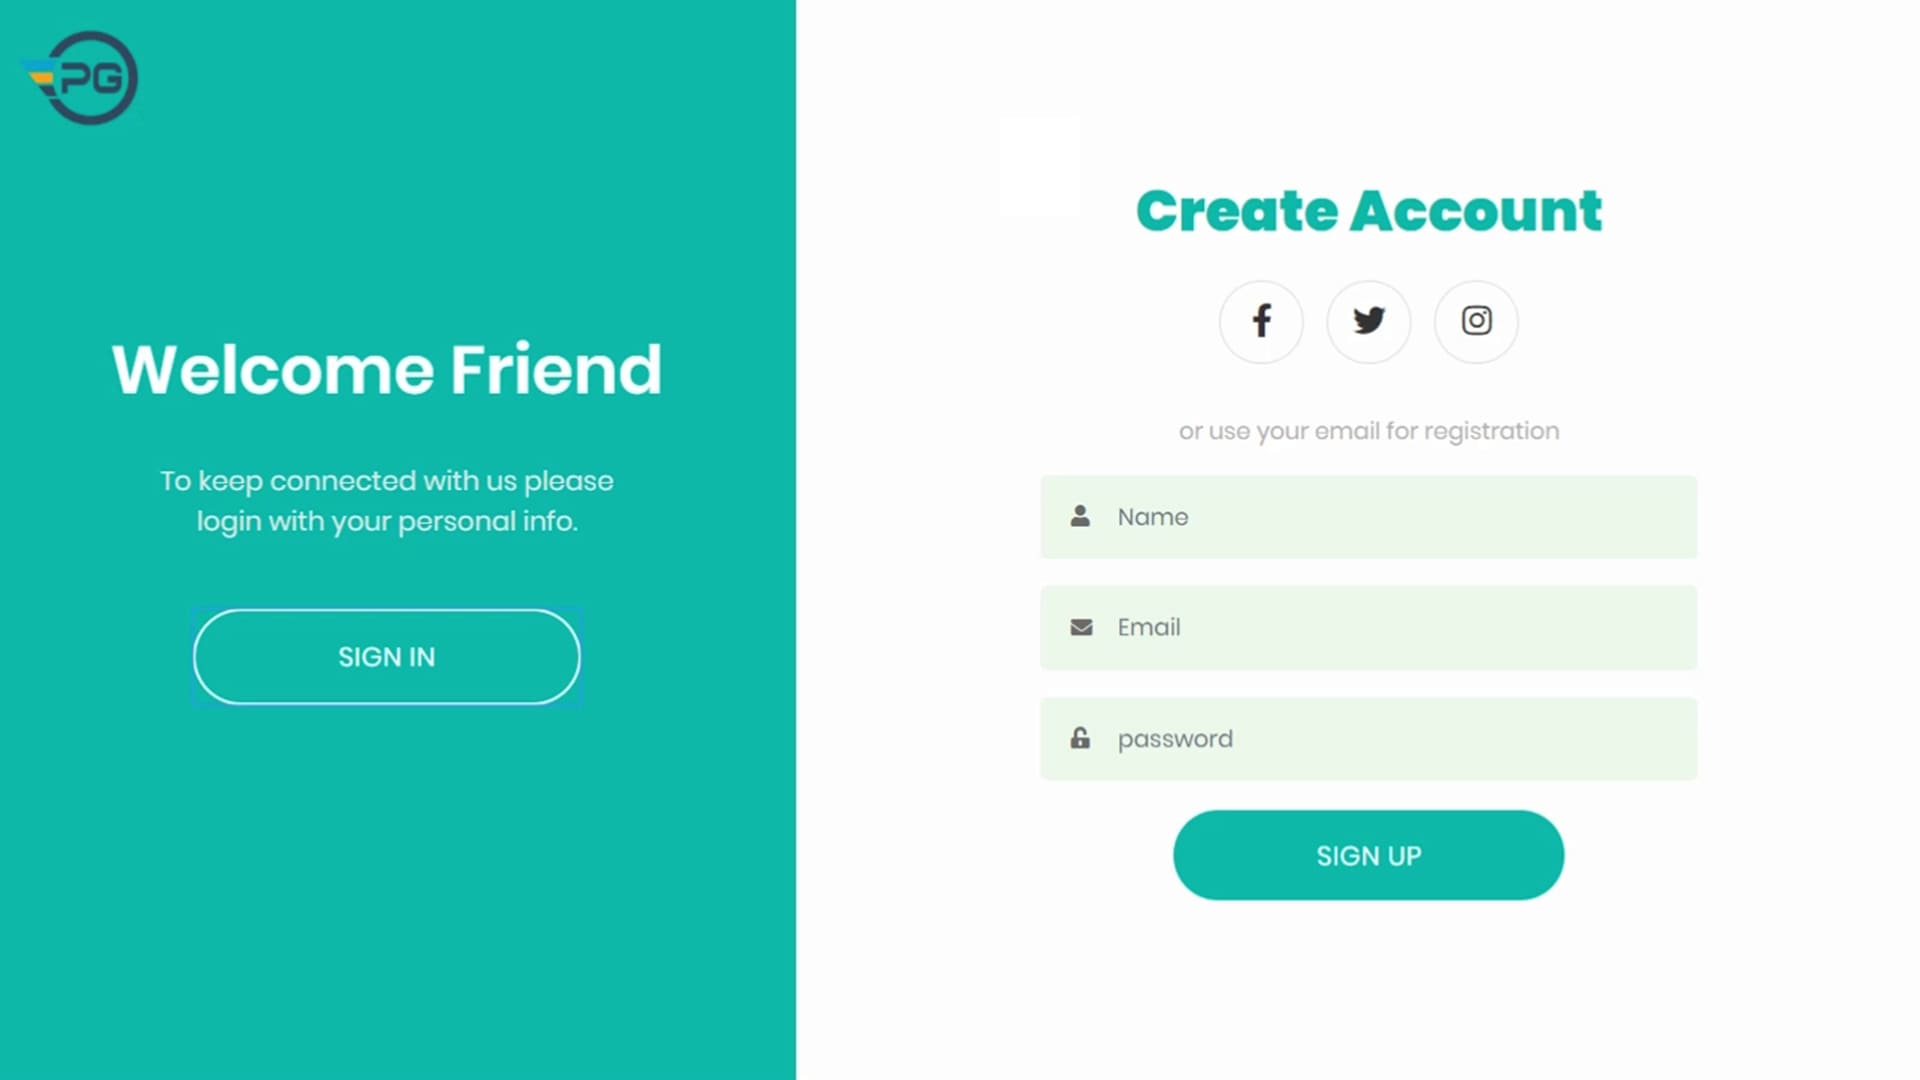 css-only-home-page-squarespace-funteedesign-how-to-create-a-login-form